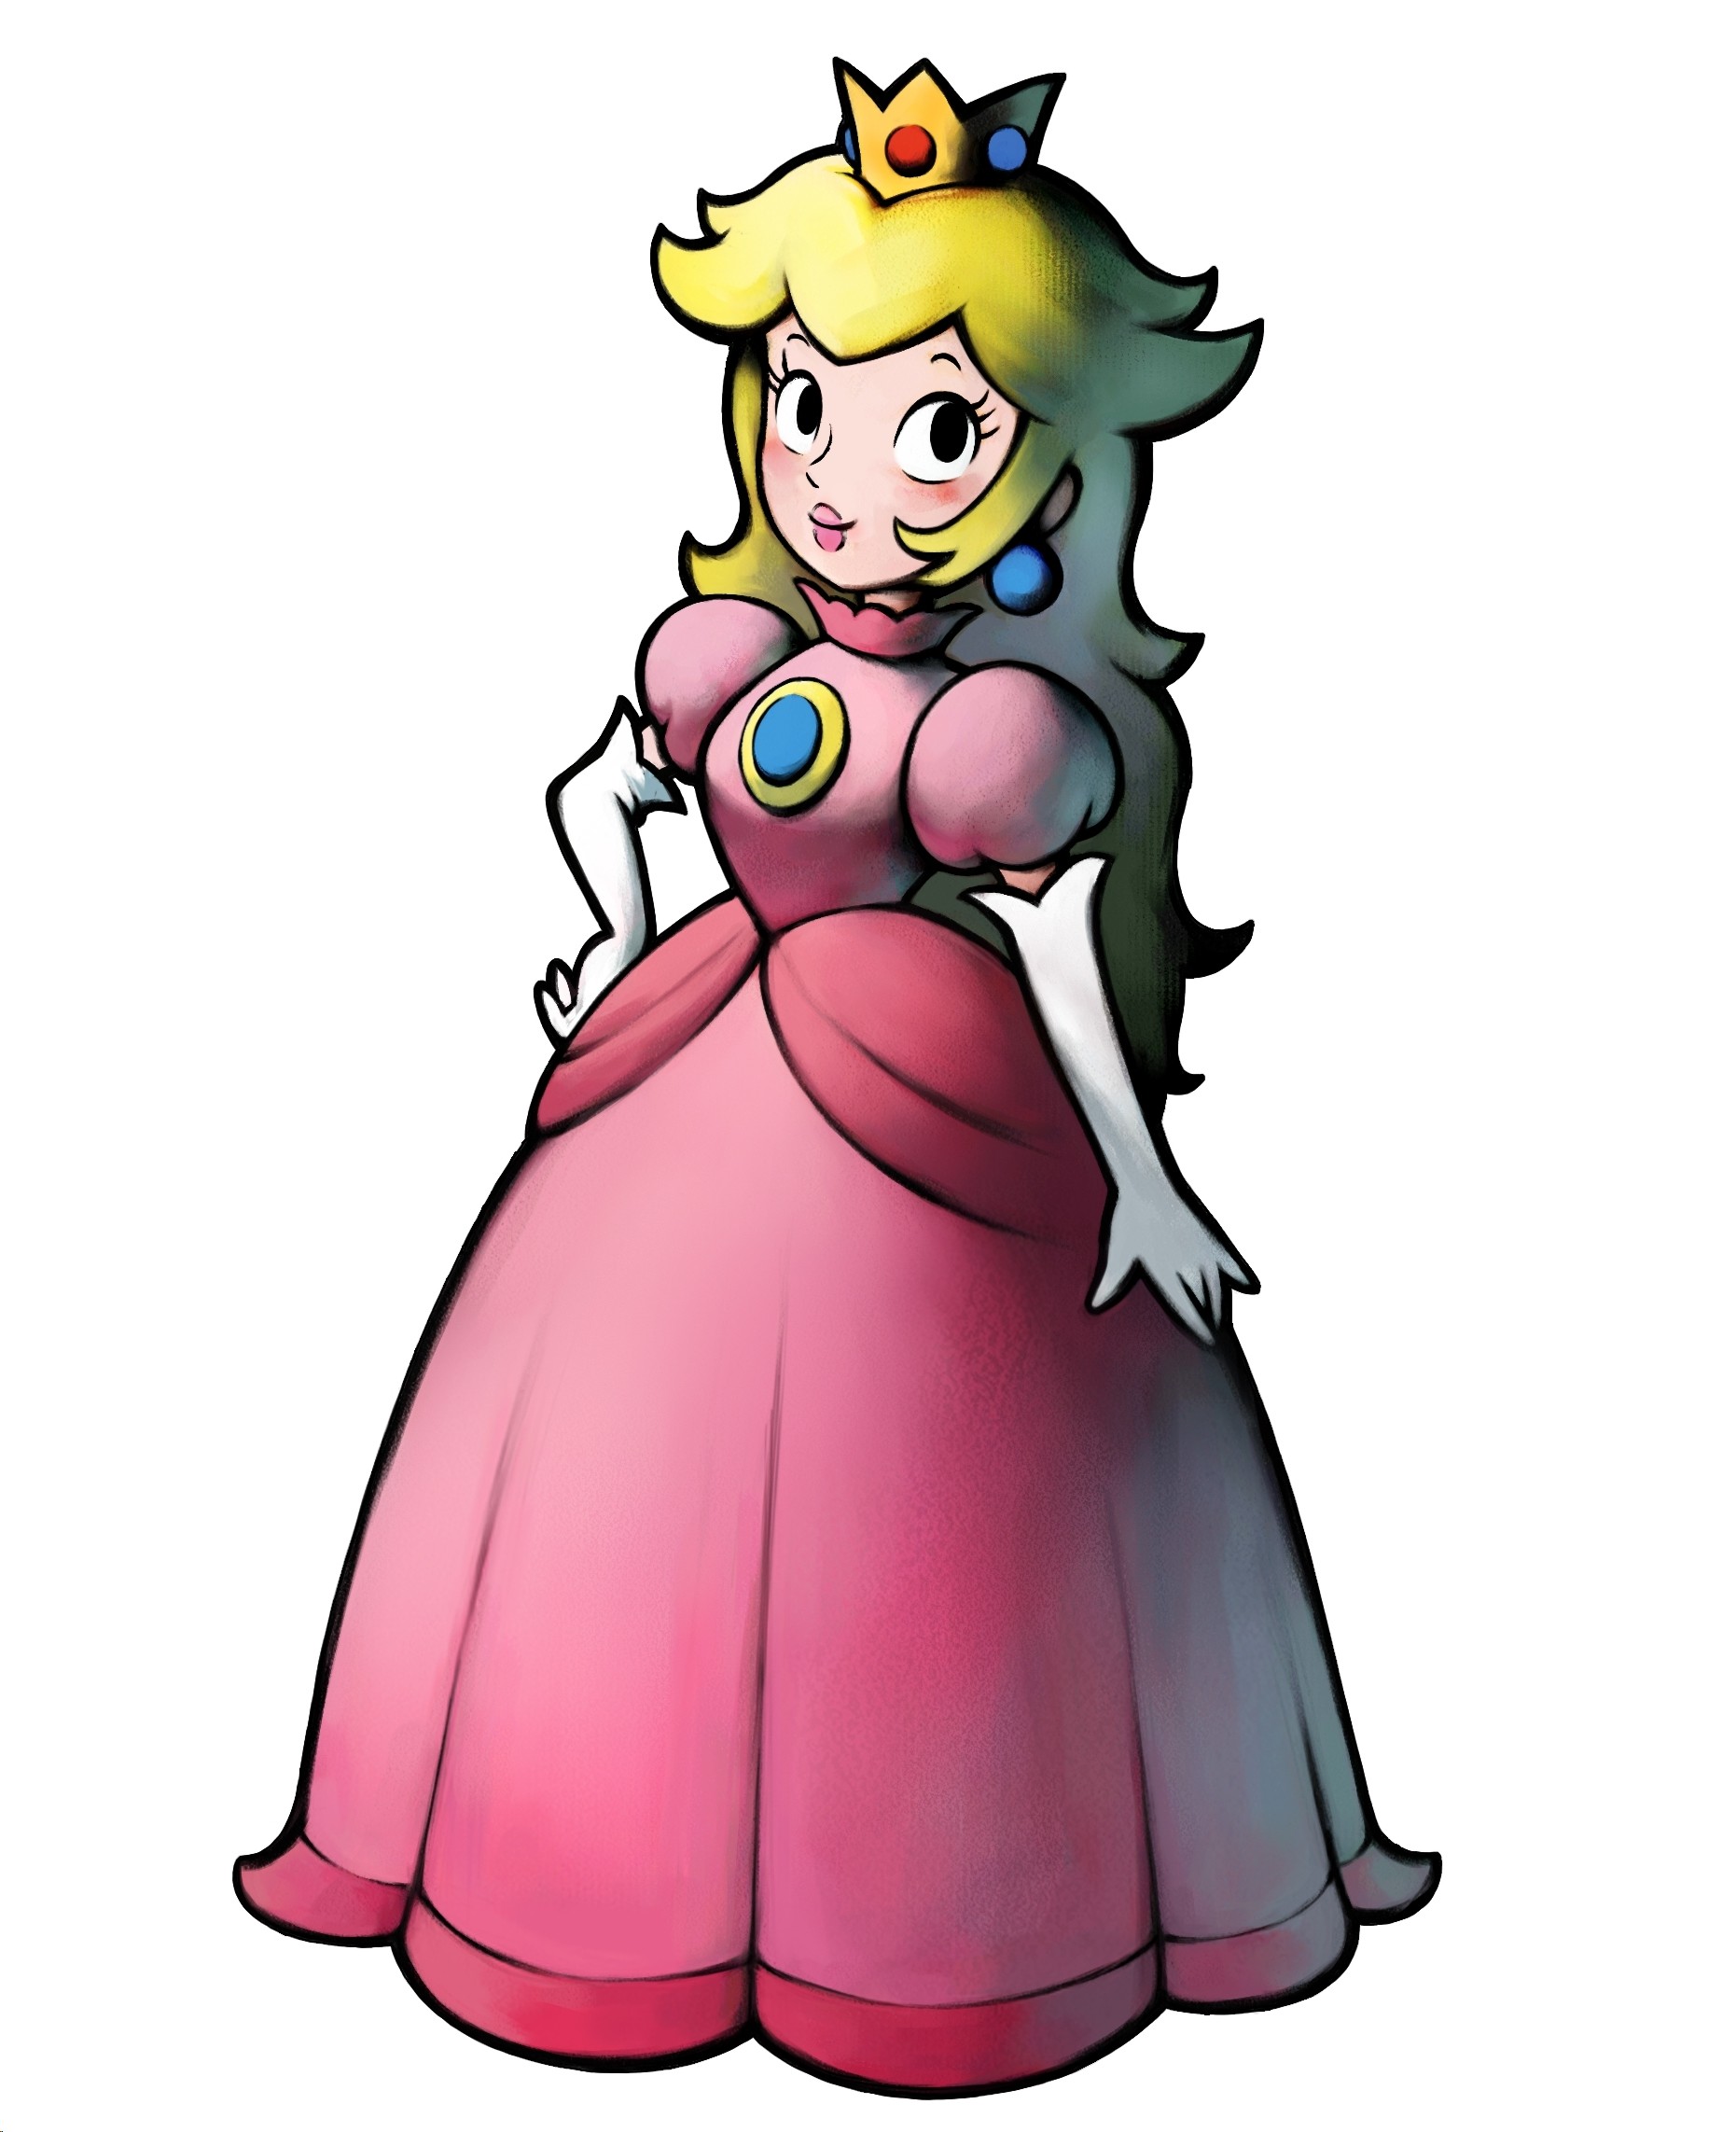 1861x2285 Princess Peach,Daisy and Rosalina images LAWL peach HD wallpaper and  background photos